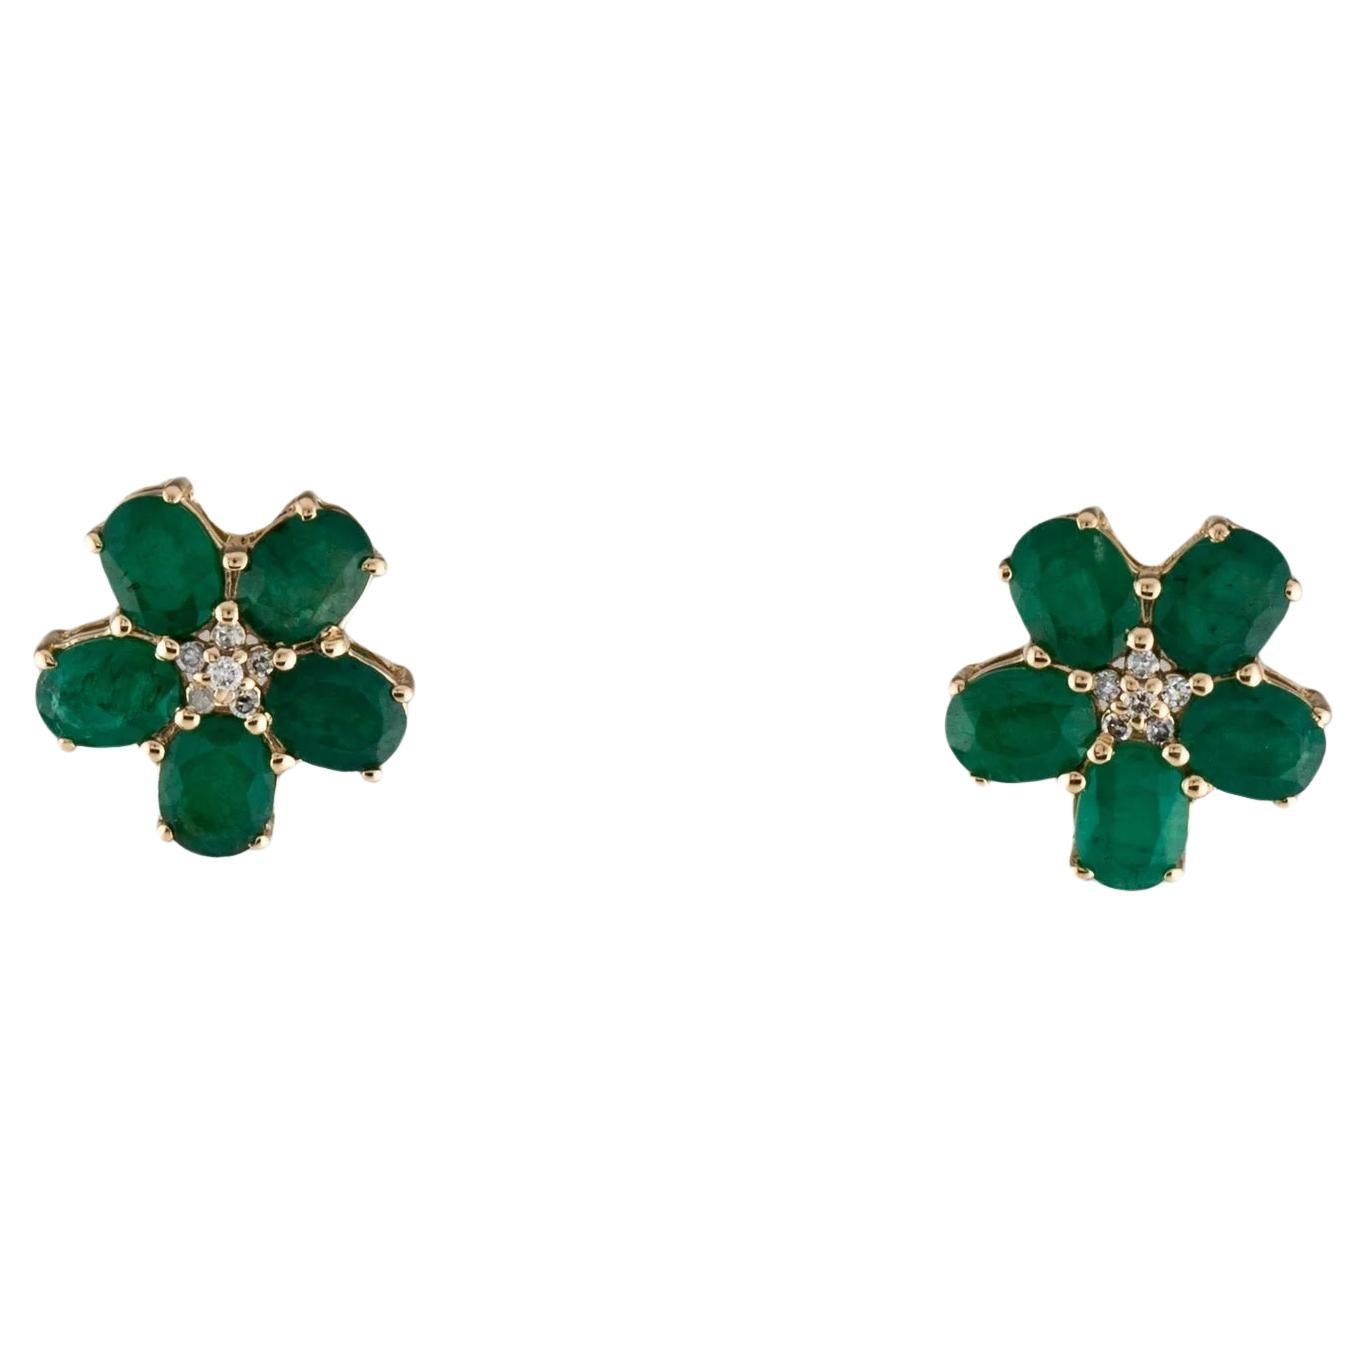 Luxurious 14K Yellow Gold Earrings with Oval Brilliant Emeralds and Diamonds